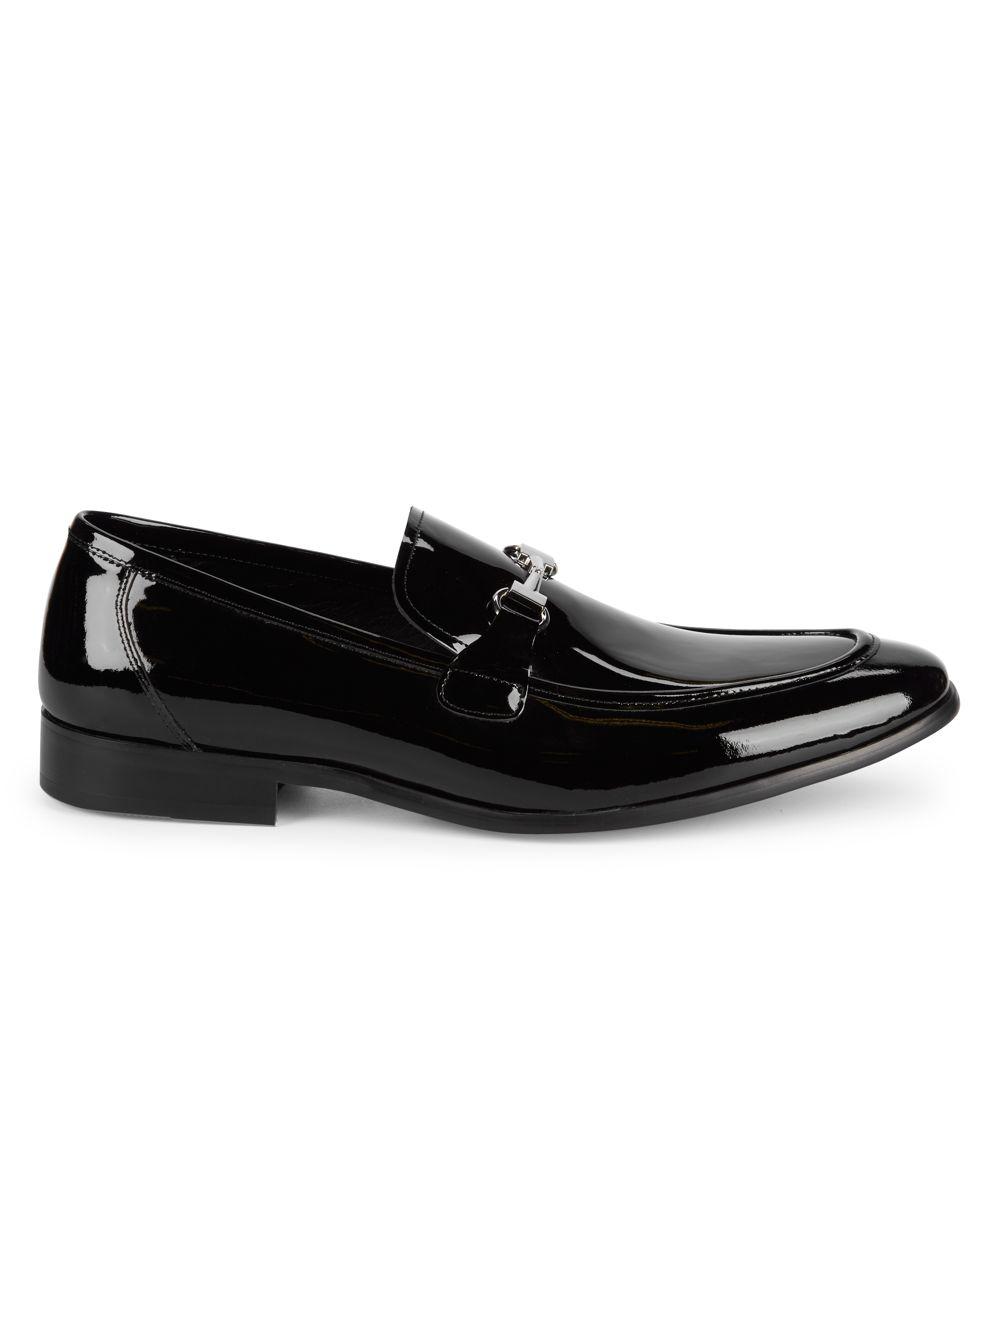 Saks Fifth Avenue New Last Patent Leather Loafers in Black for Men - Lyst